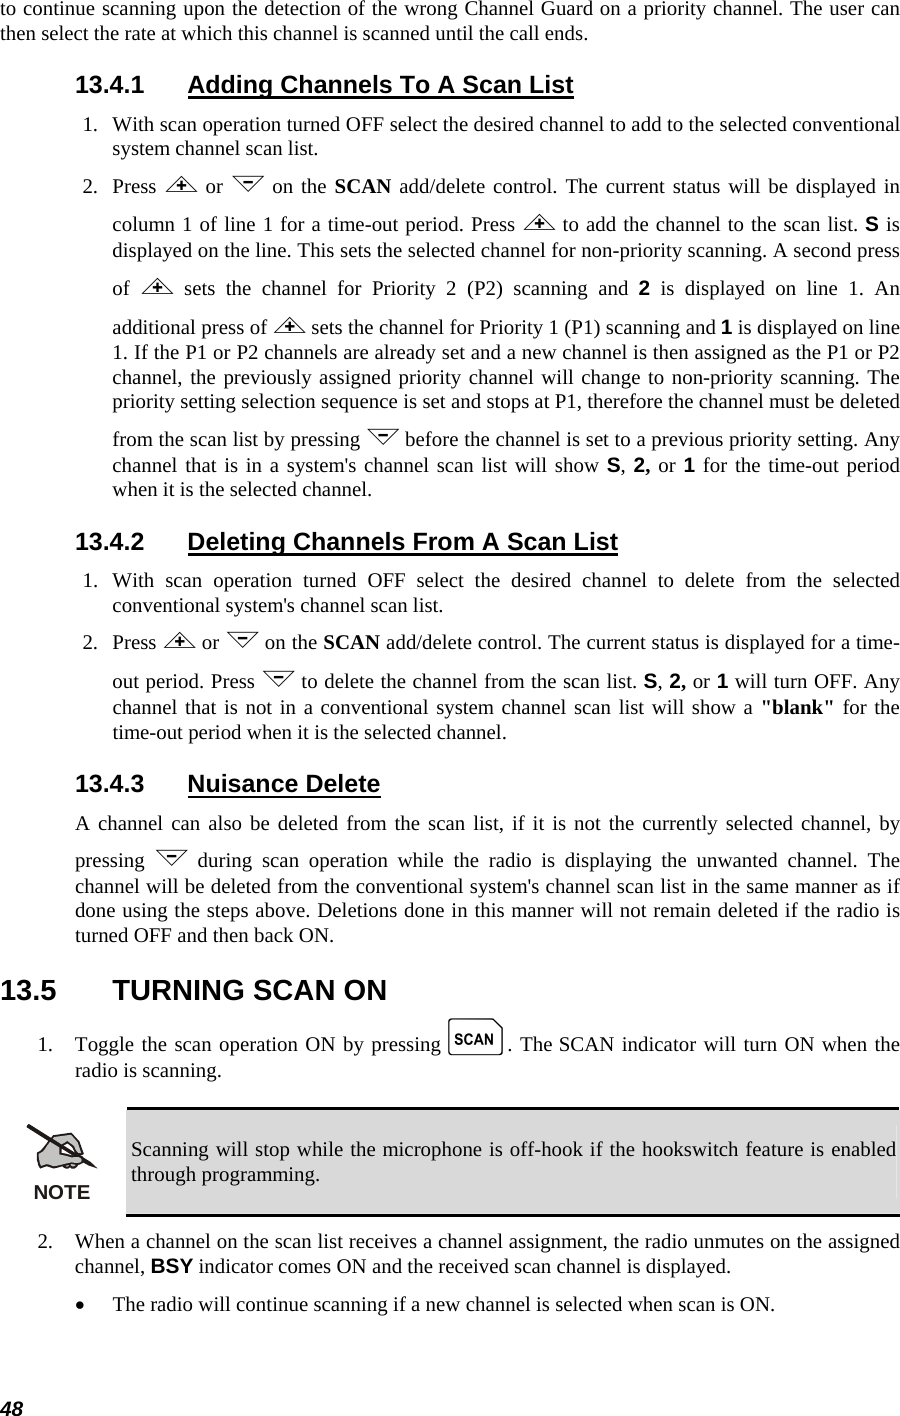  48 to continue scanning upon the detection of the wrong Channel Guard on a priority channel. The user can then select the rate at which this channel is scanned until the call ends. 13.4.1  Adding Channels To A Scan List 1.  With scan operation turned OFF select the desired channel to add to the selected conventional system channel scan list. 2.   Press &lt; or &gt; on the SCAN add/delete control. The current status will be displayed in column 1 of line 1 for a time-out period. Press &lt; to add the channel to the scan list. S is displayed on the line. This sets the selected channel for non-priority scanning. A second press of  &lt; sets the channel for Priority 2 (P2) scanning and 2 is displayed on line 1. An additional press of &lt; sets the channel for Priority 1 (P1) scanning and 1 is displayed on line 1. If the P1 or P2 channels are already set and a new channel is then assigned as the P1 or P2 channel, the previously assigned priority channel will change to non-priority scanning. The priority setting selection sequence is set and stops at P1, therefore the channel must be deleted from the scan list by pressing &gt; before the channel is set to a previous priority setting. Any channel that is in a system&apos;s channel scan list will show S, 2, or 1 for the time-out period when it is the selected channel. 13.4.2  Deleting Channels From A Scan List 1.  With scan operation turned OFF select the desired channel to delete from the selected conventional system&apos;s channel scan list. 2.   Press &lt; or &gt; on the SCAN add/delete control. The current status is displayed for a time-out period. Press &gt; to delete the channel from the scan list. S, 2, or 1 will turn OFF. Any channel that is not in a conventional system channel scan list will show a &quot;blank&quot; for the time-out period when it is the selected channel. 13.4.3 Nuisance Delete A channel can also be deleted from the scan list, if it is not the currently selected channel, by pressing  &gt; during scan operation while the radio is displaying the unwanted channel. The channel will be deleted from the conventional system&apos;s channel scan list in the same manner as if done using the steps above. Deletions done in this manner will not remain deleted if the radio is turned OFF and then back ON. 13.5  TURNING SCAN ON 1.   Toggle the scan operation ON by pressing k. The SCAN indicator will turn ON when the radio is scanning.  NOTE Scanning will stop while the microphone is off-hook if the hookswitch feature is enabled through programming. 2.   When a channel on the scan list receives a channel assignment, the radio unmutes on the assigned channel, BSY indicator comes ON and the received scan channel is displayed. • The radio will continue scanning if a new channel is selected when scan is ON. 